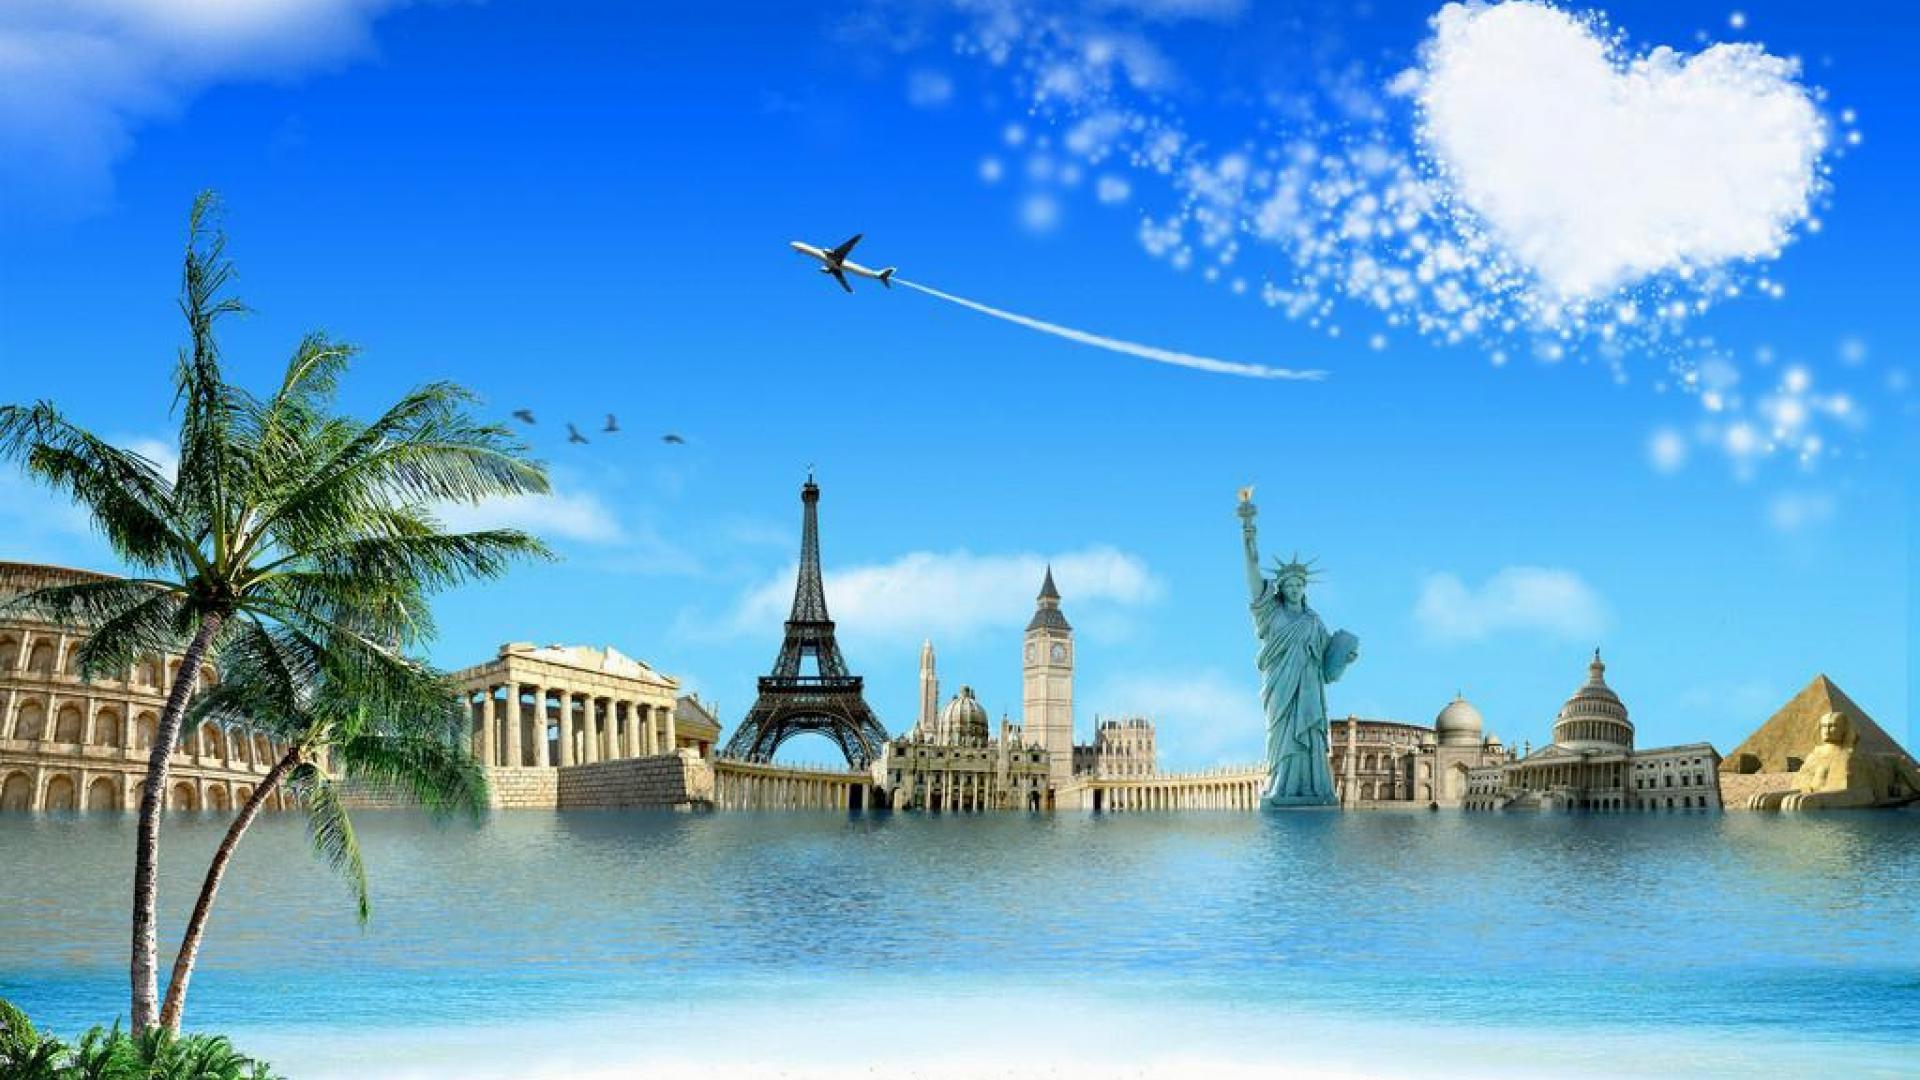 Travel Desktop Wallpaper - Tours And Travels Background - 1920x1080 ...